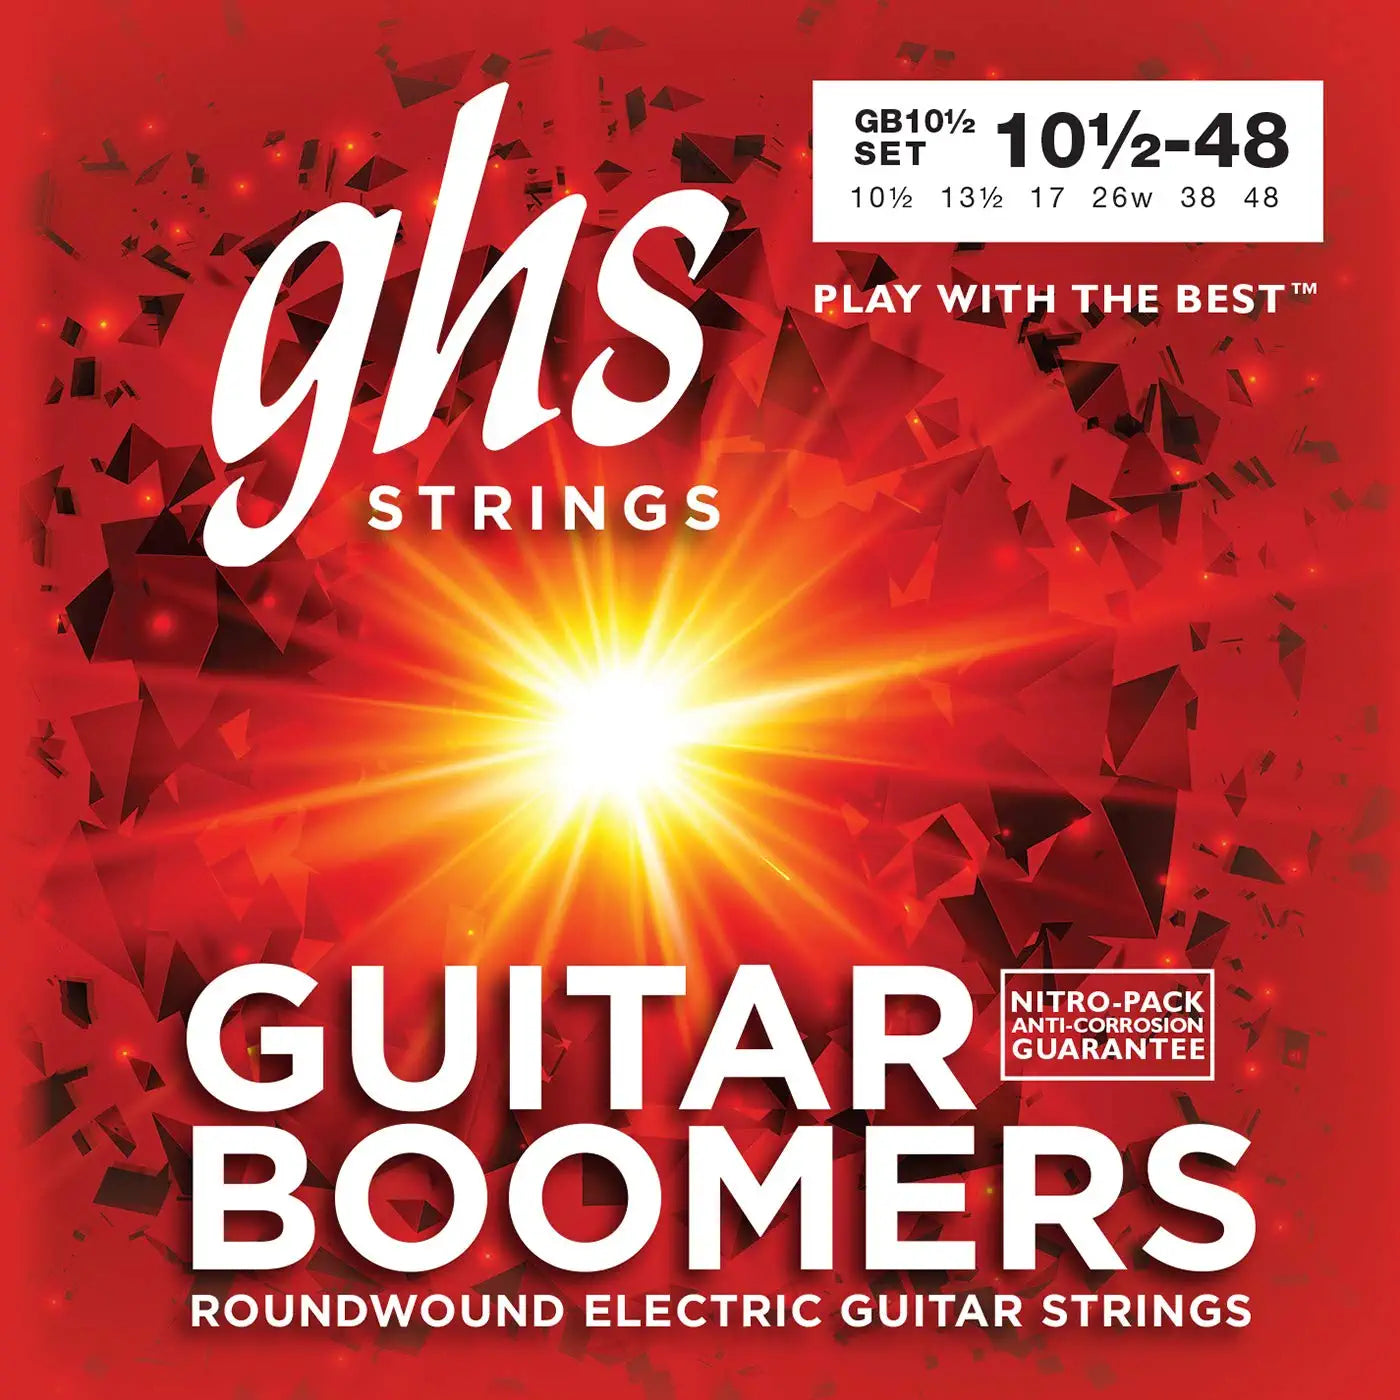 GHS BOOMERS Nickel-Plated Electric Guitar Strings, Light+ (010 1/2-048) - GB10 1/2 - Poppa's Music 